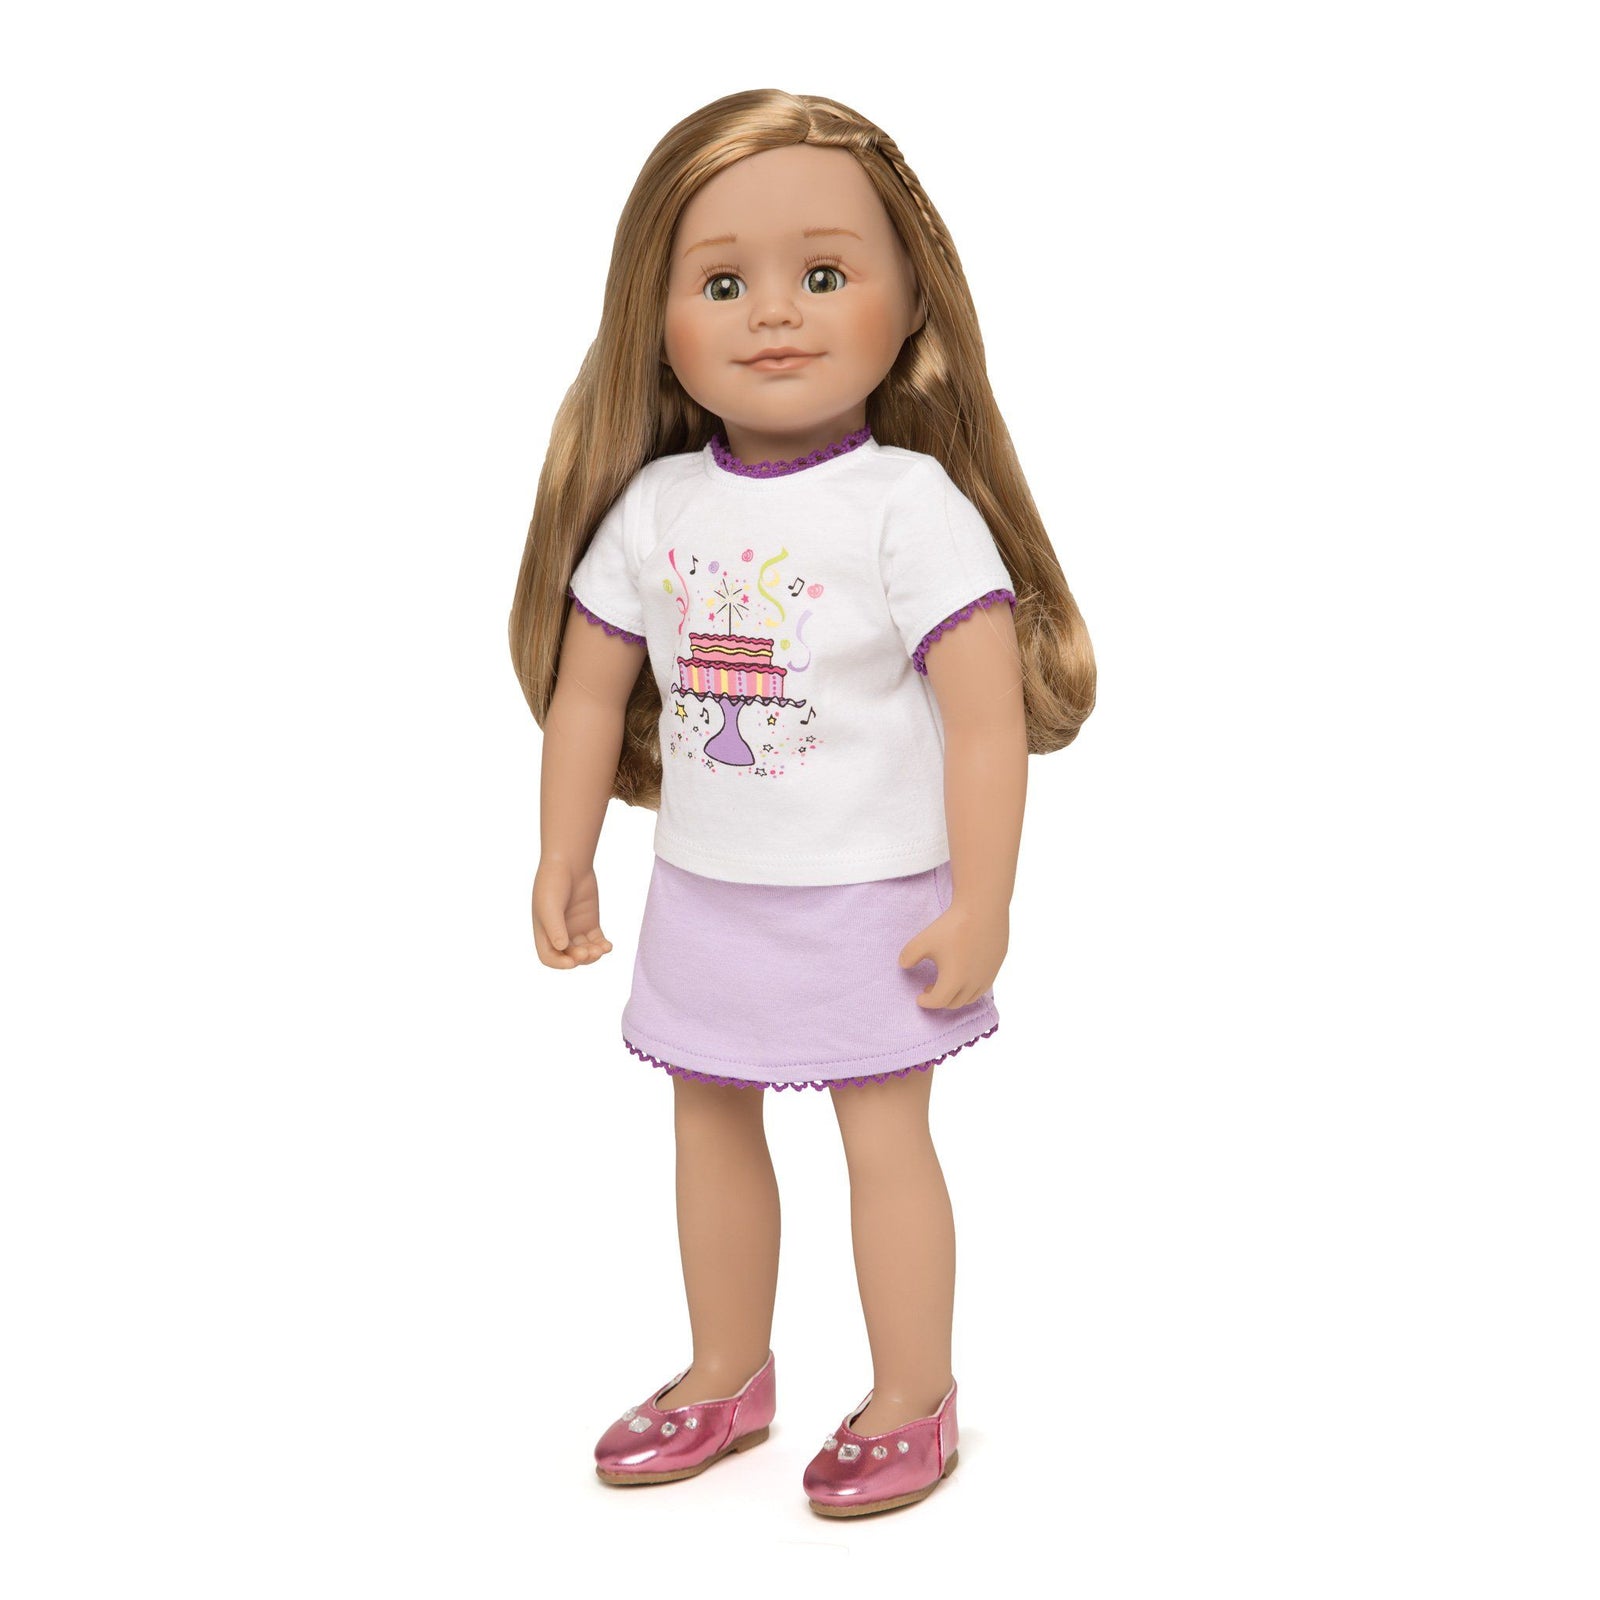 Dress Alike and Match With Your Dolls - Maplelea